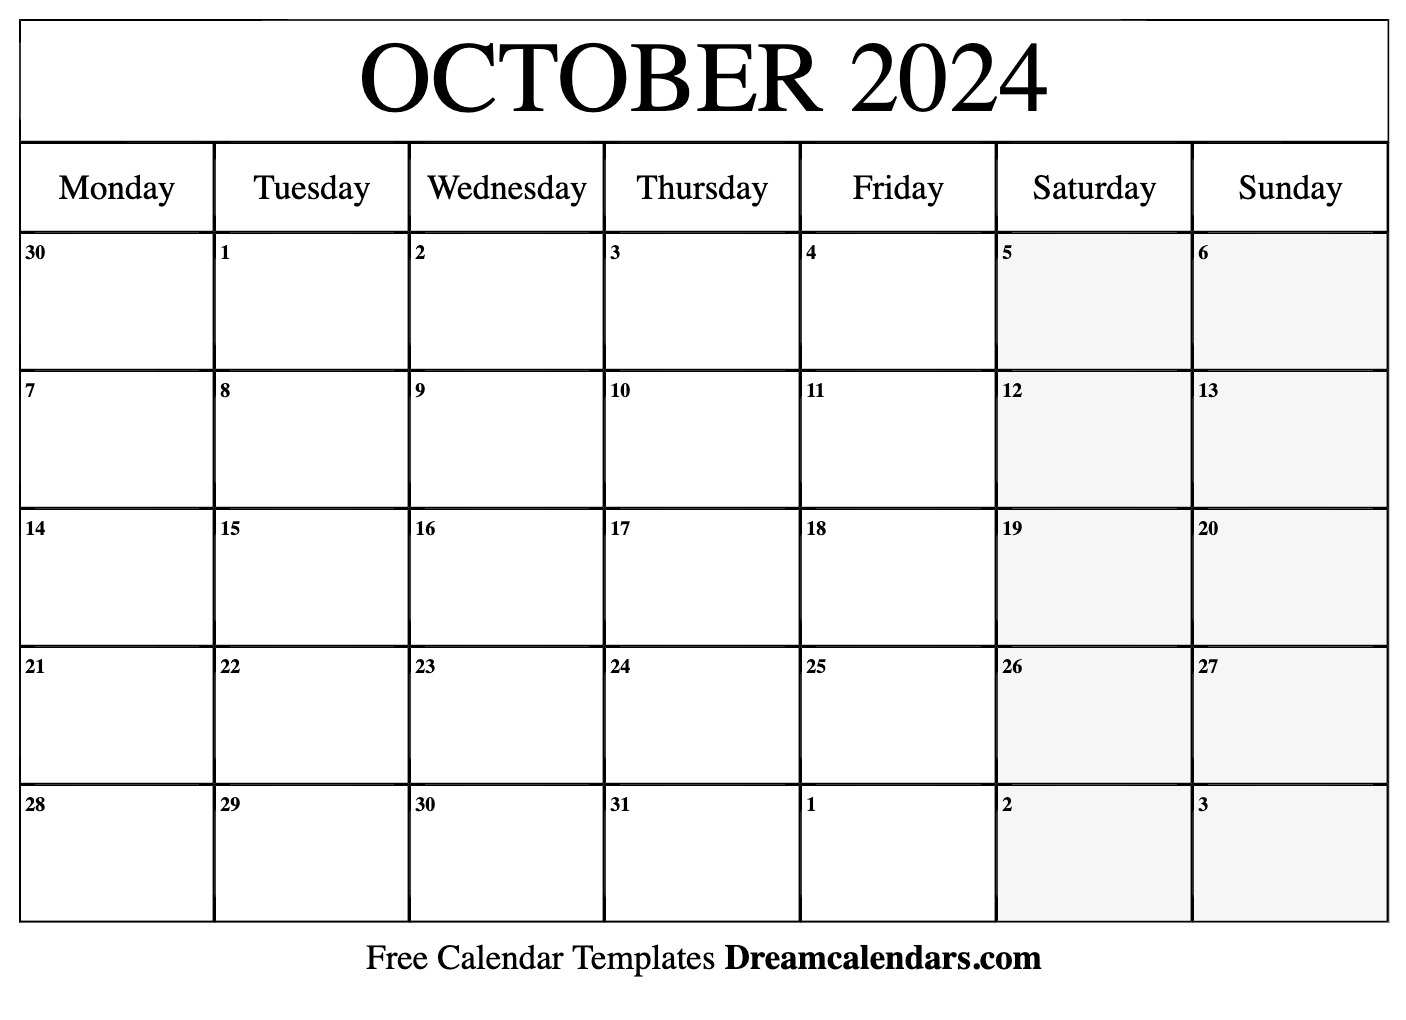 October 2024 Calendar | Free Blank Printable With Holidays for Free Printable Blank October Calendar 2024